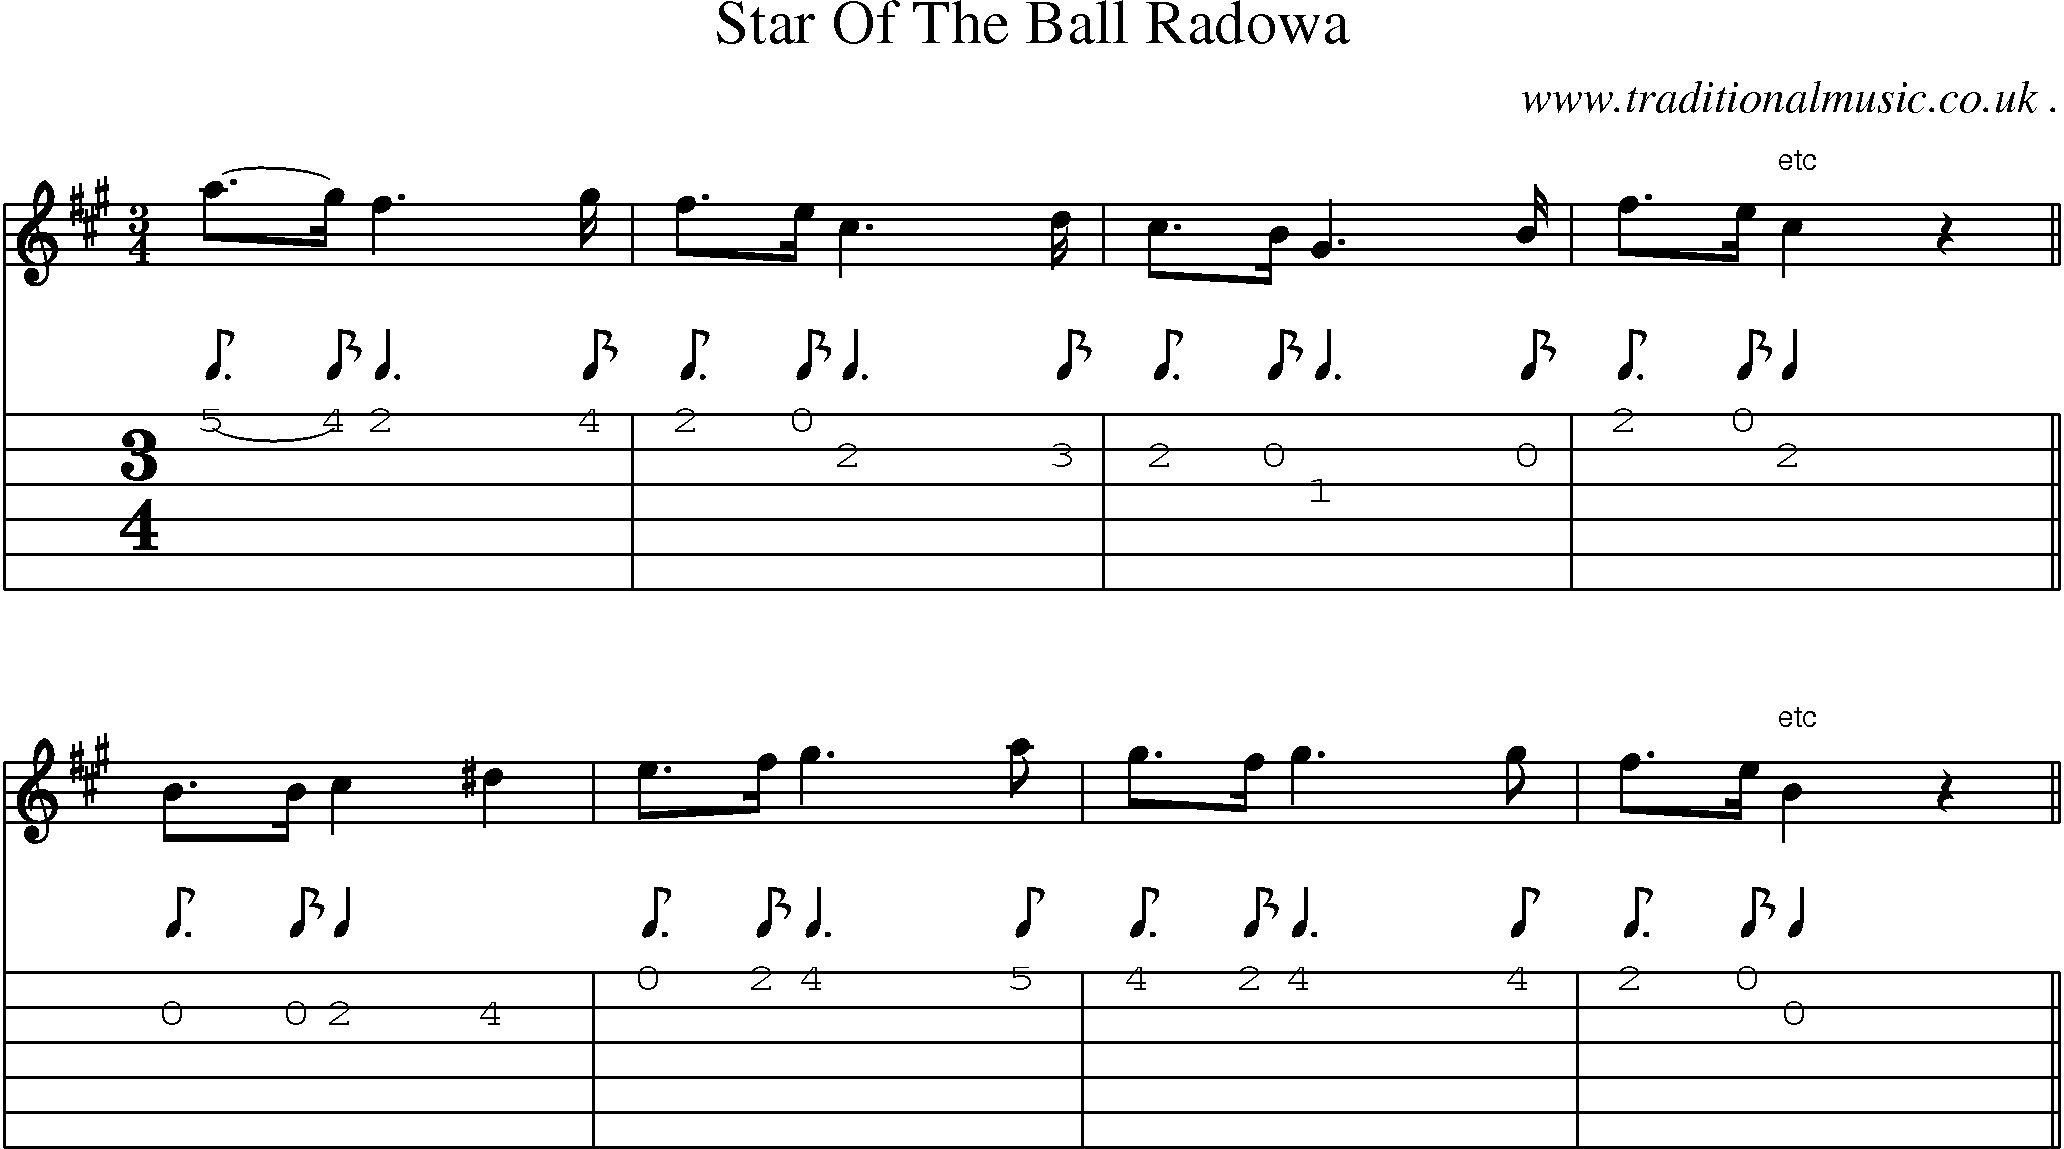 Sheet-Music and Guitar Tabs for Star Of The Ball Radowa